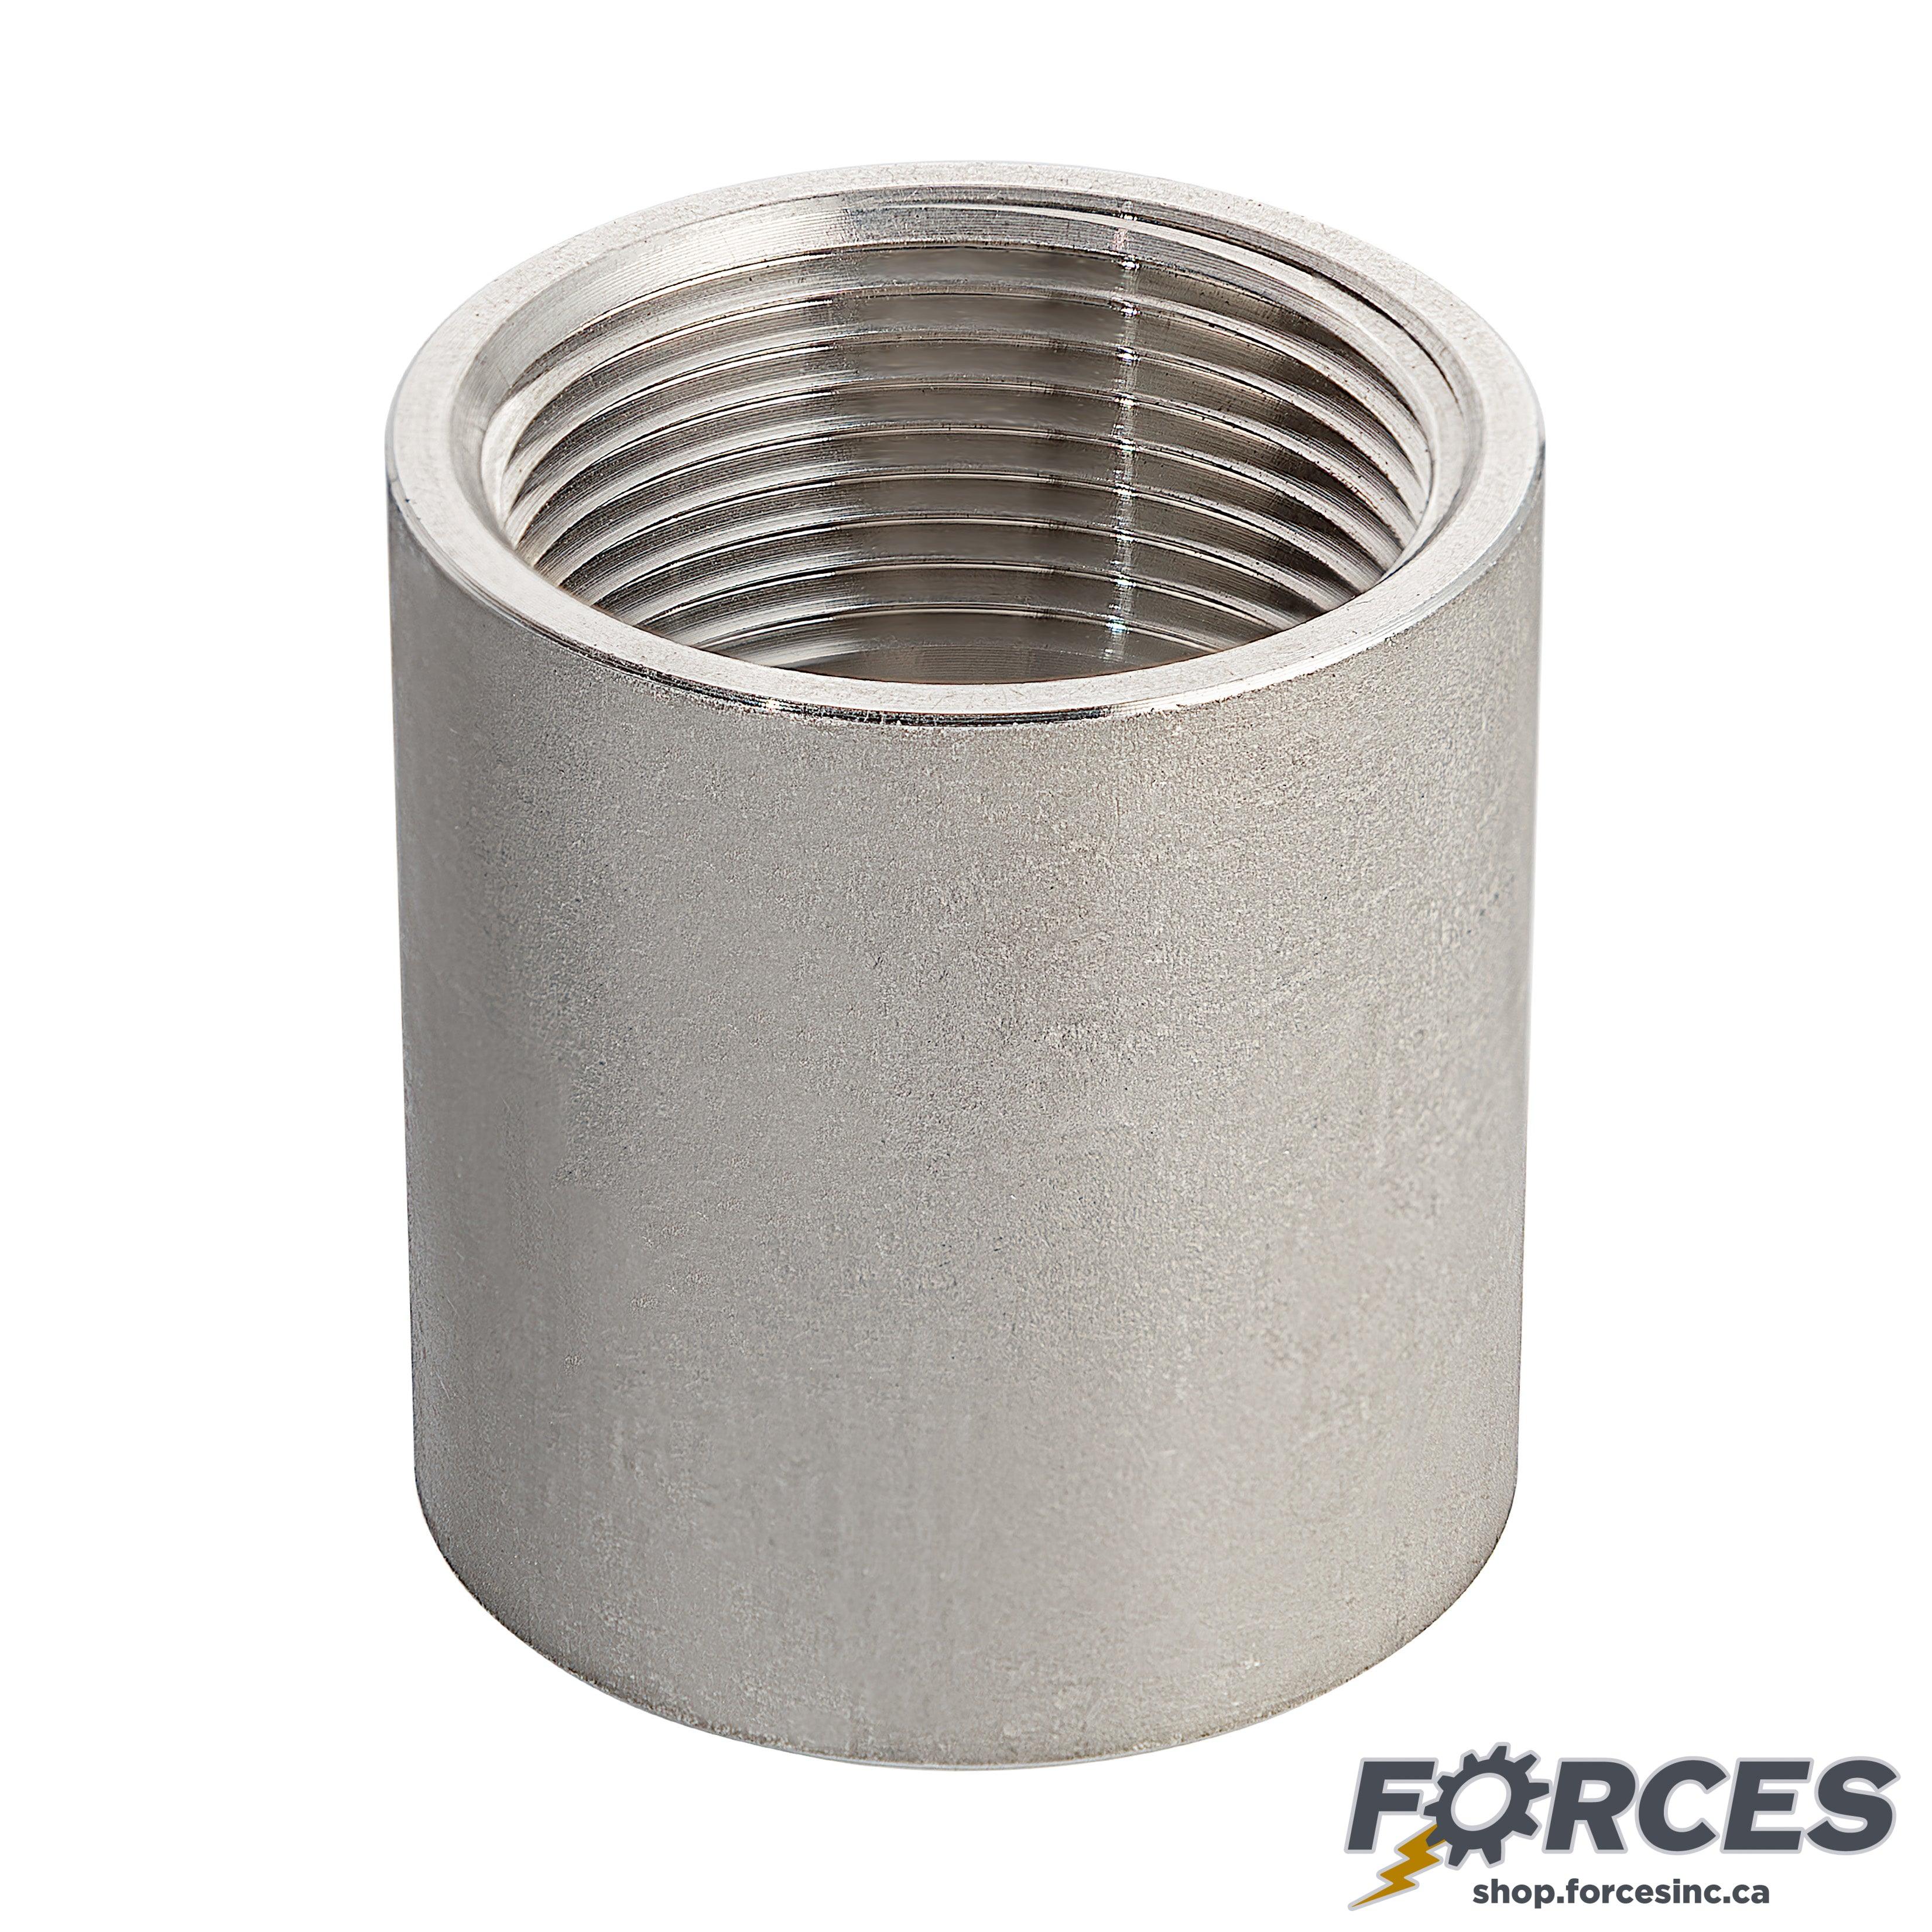 1/2" Coupling NPT #150 - Stainless Steel 316 - Forces Inc